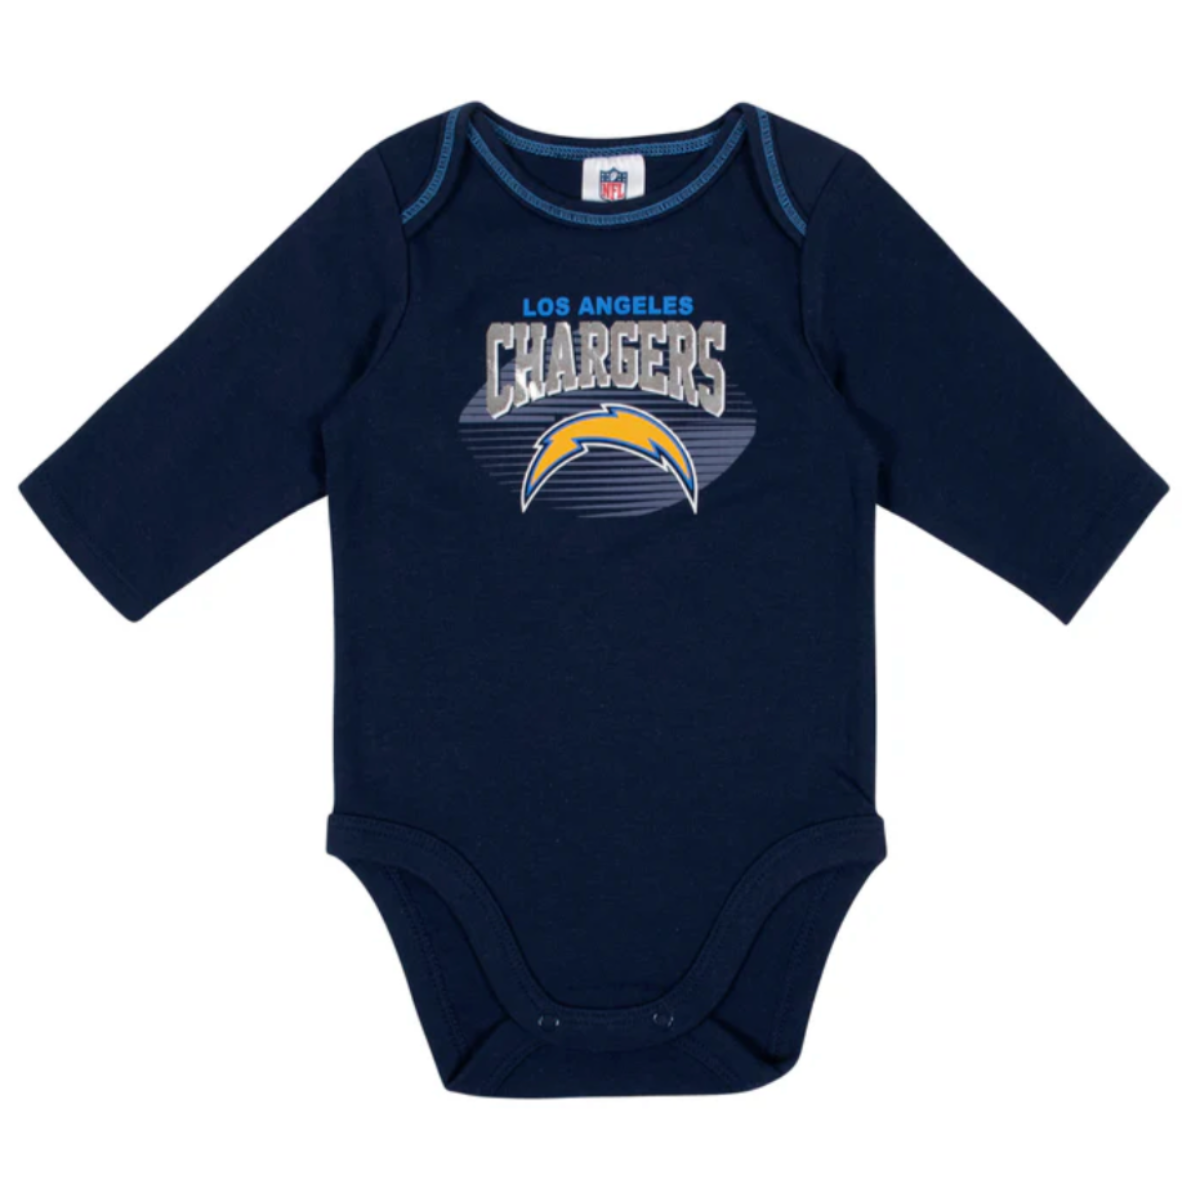 Los Angeles Chargers Baby Long Sleeve Bodysuits, 2-pack - NFL Official